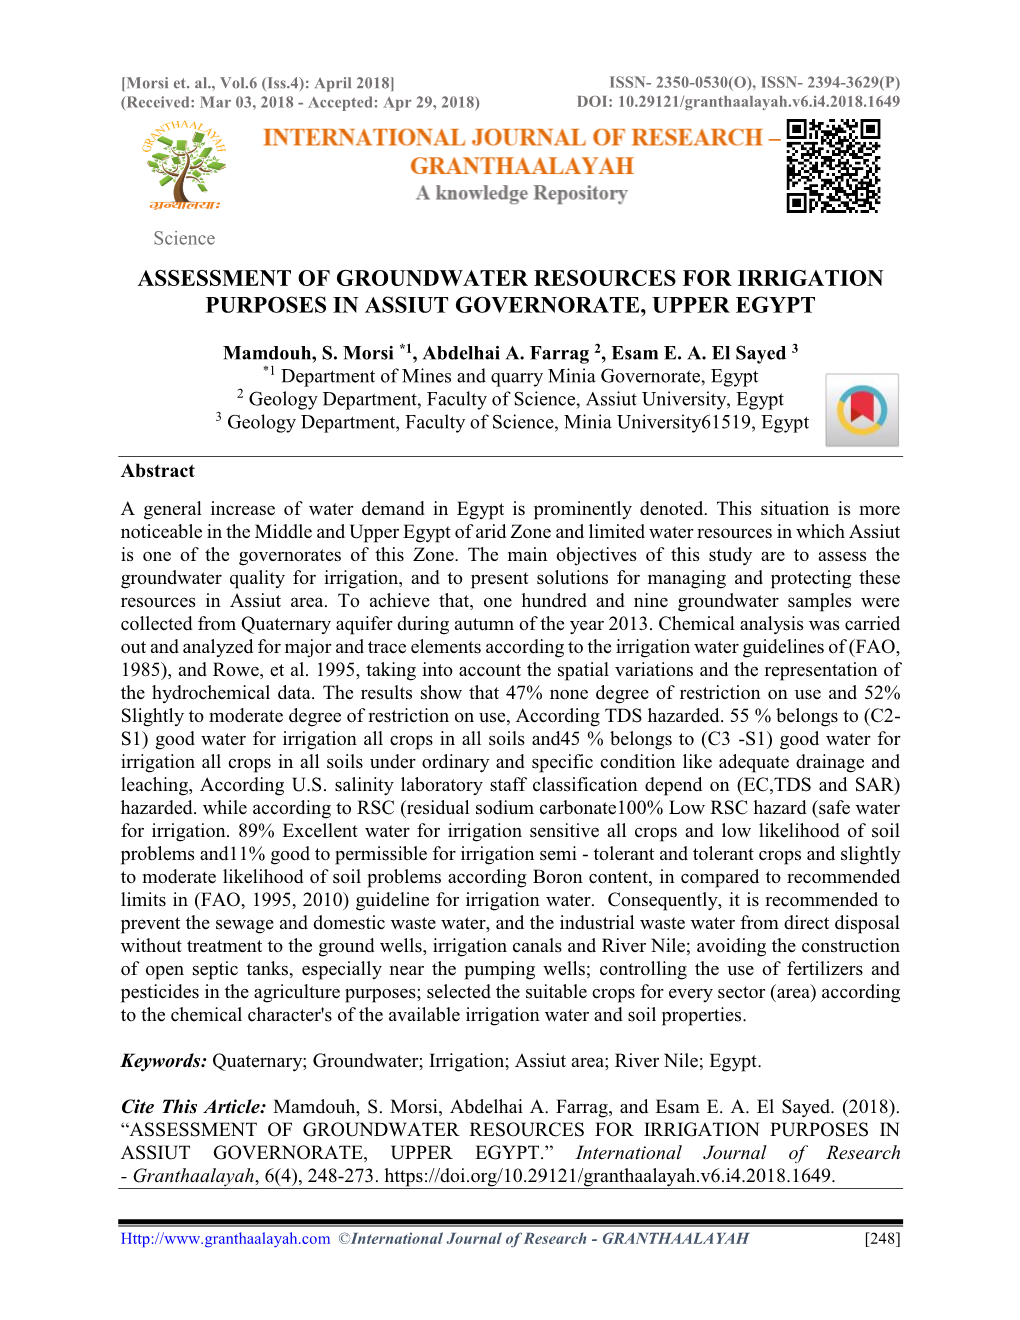 Assessment of Groundwater Resources for Irrigation Purposes in Assiut Governorate, Upper Egypt